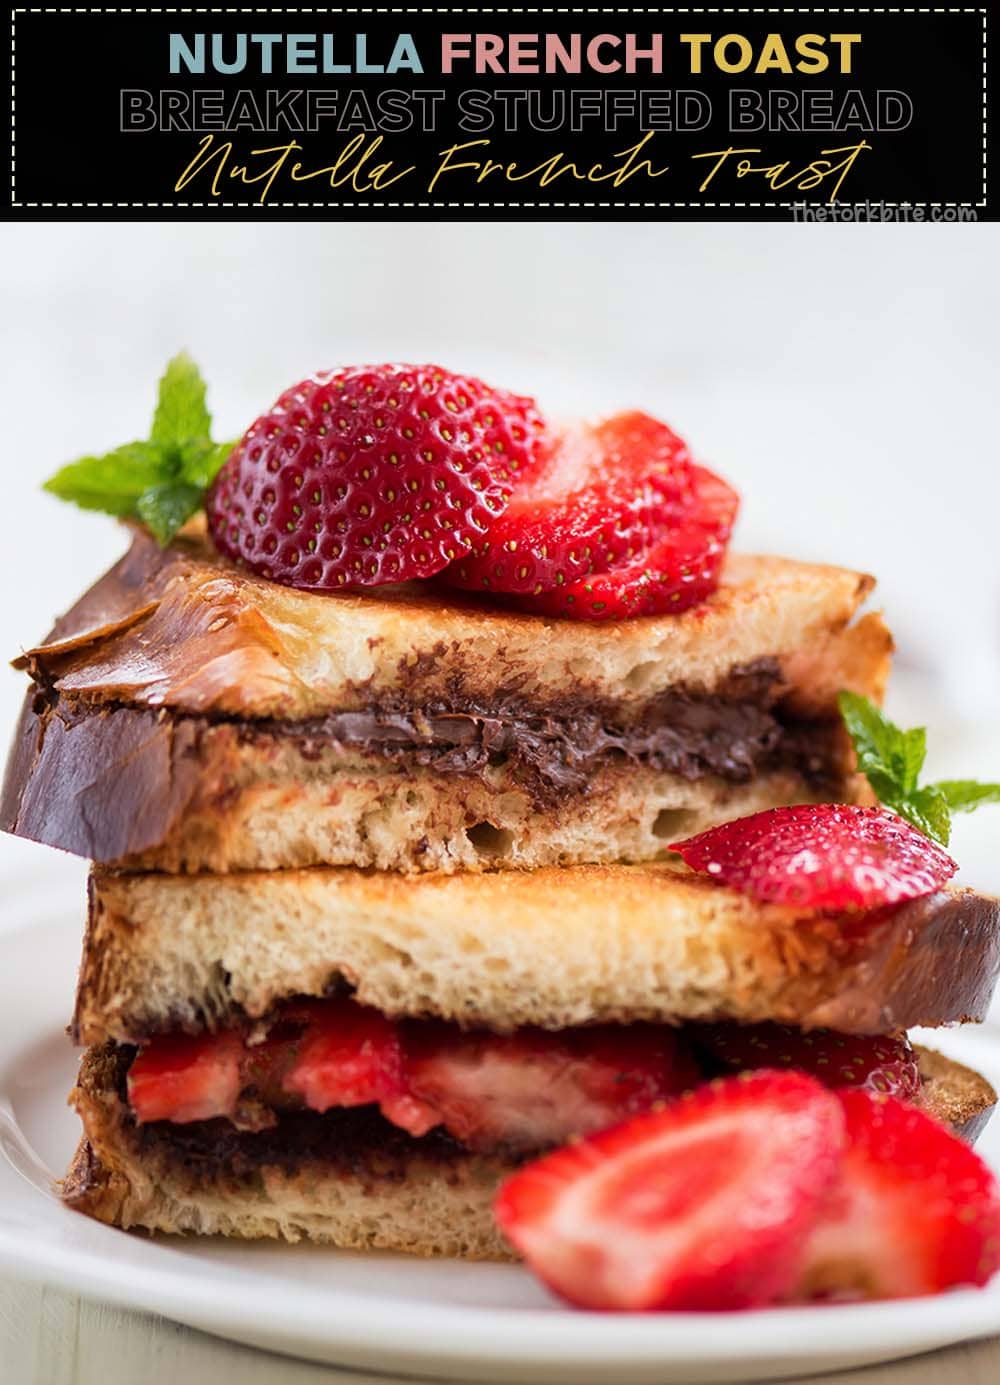 We all know what a good batch of breakfast stuffed bread French toast tastes crispy with a mild crunch on the outside and filled with a luscious-tasting, sweet center.